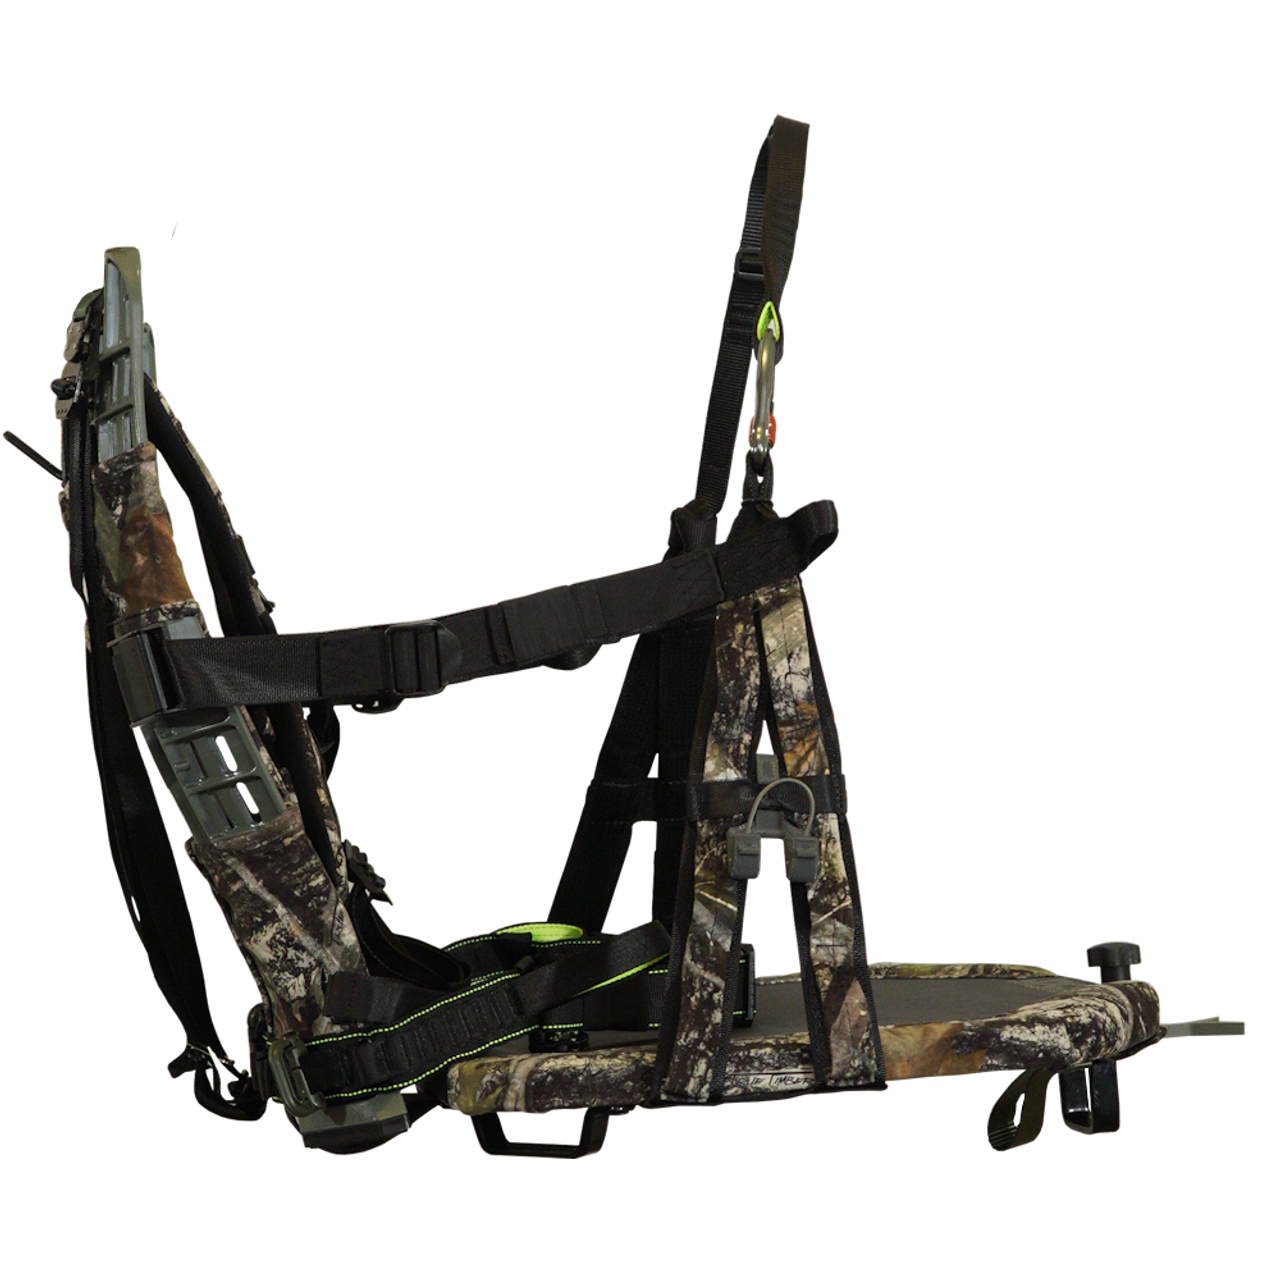 JX3 Hybrid Hunting Saddle, The Hunter's All-In-One Tree Stand